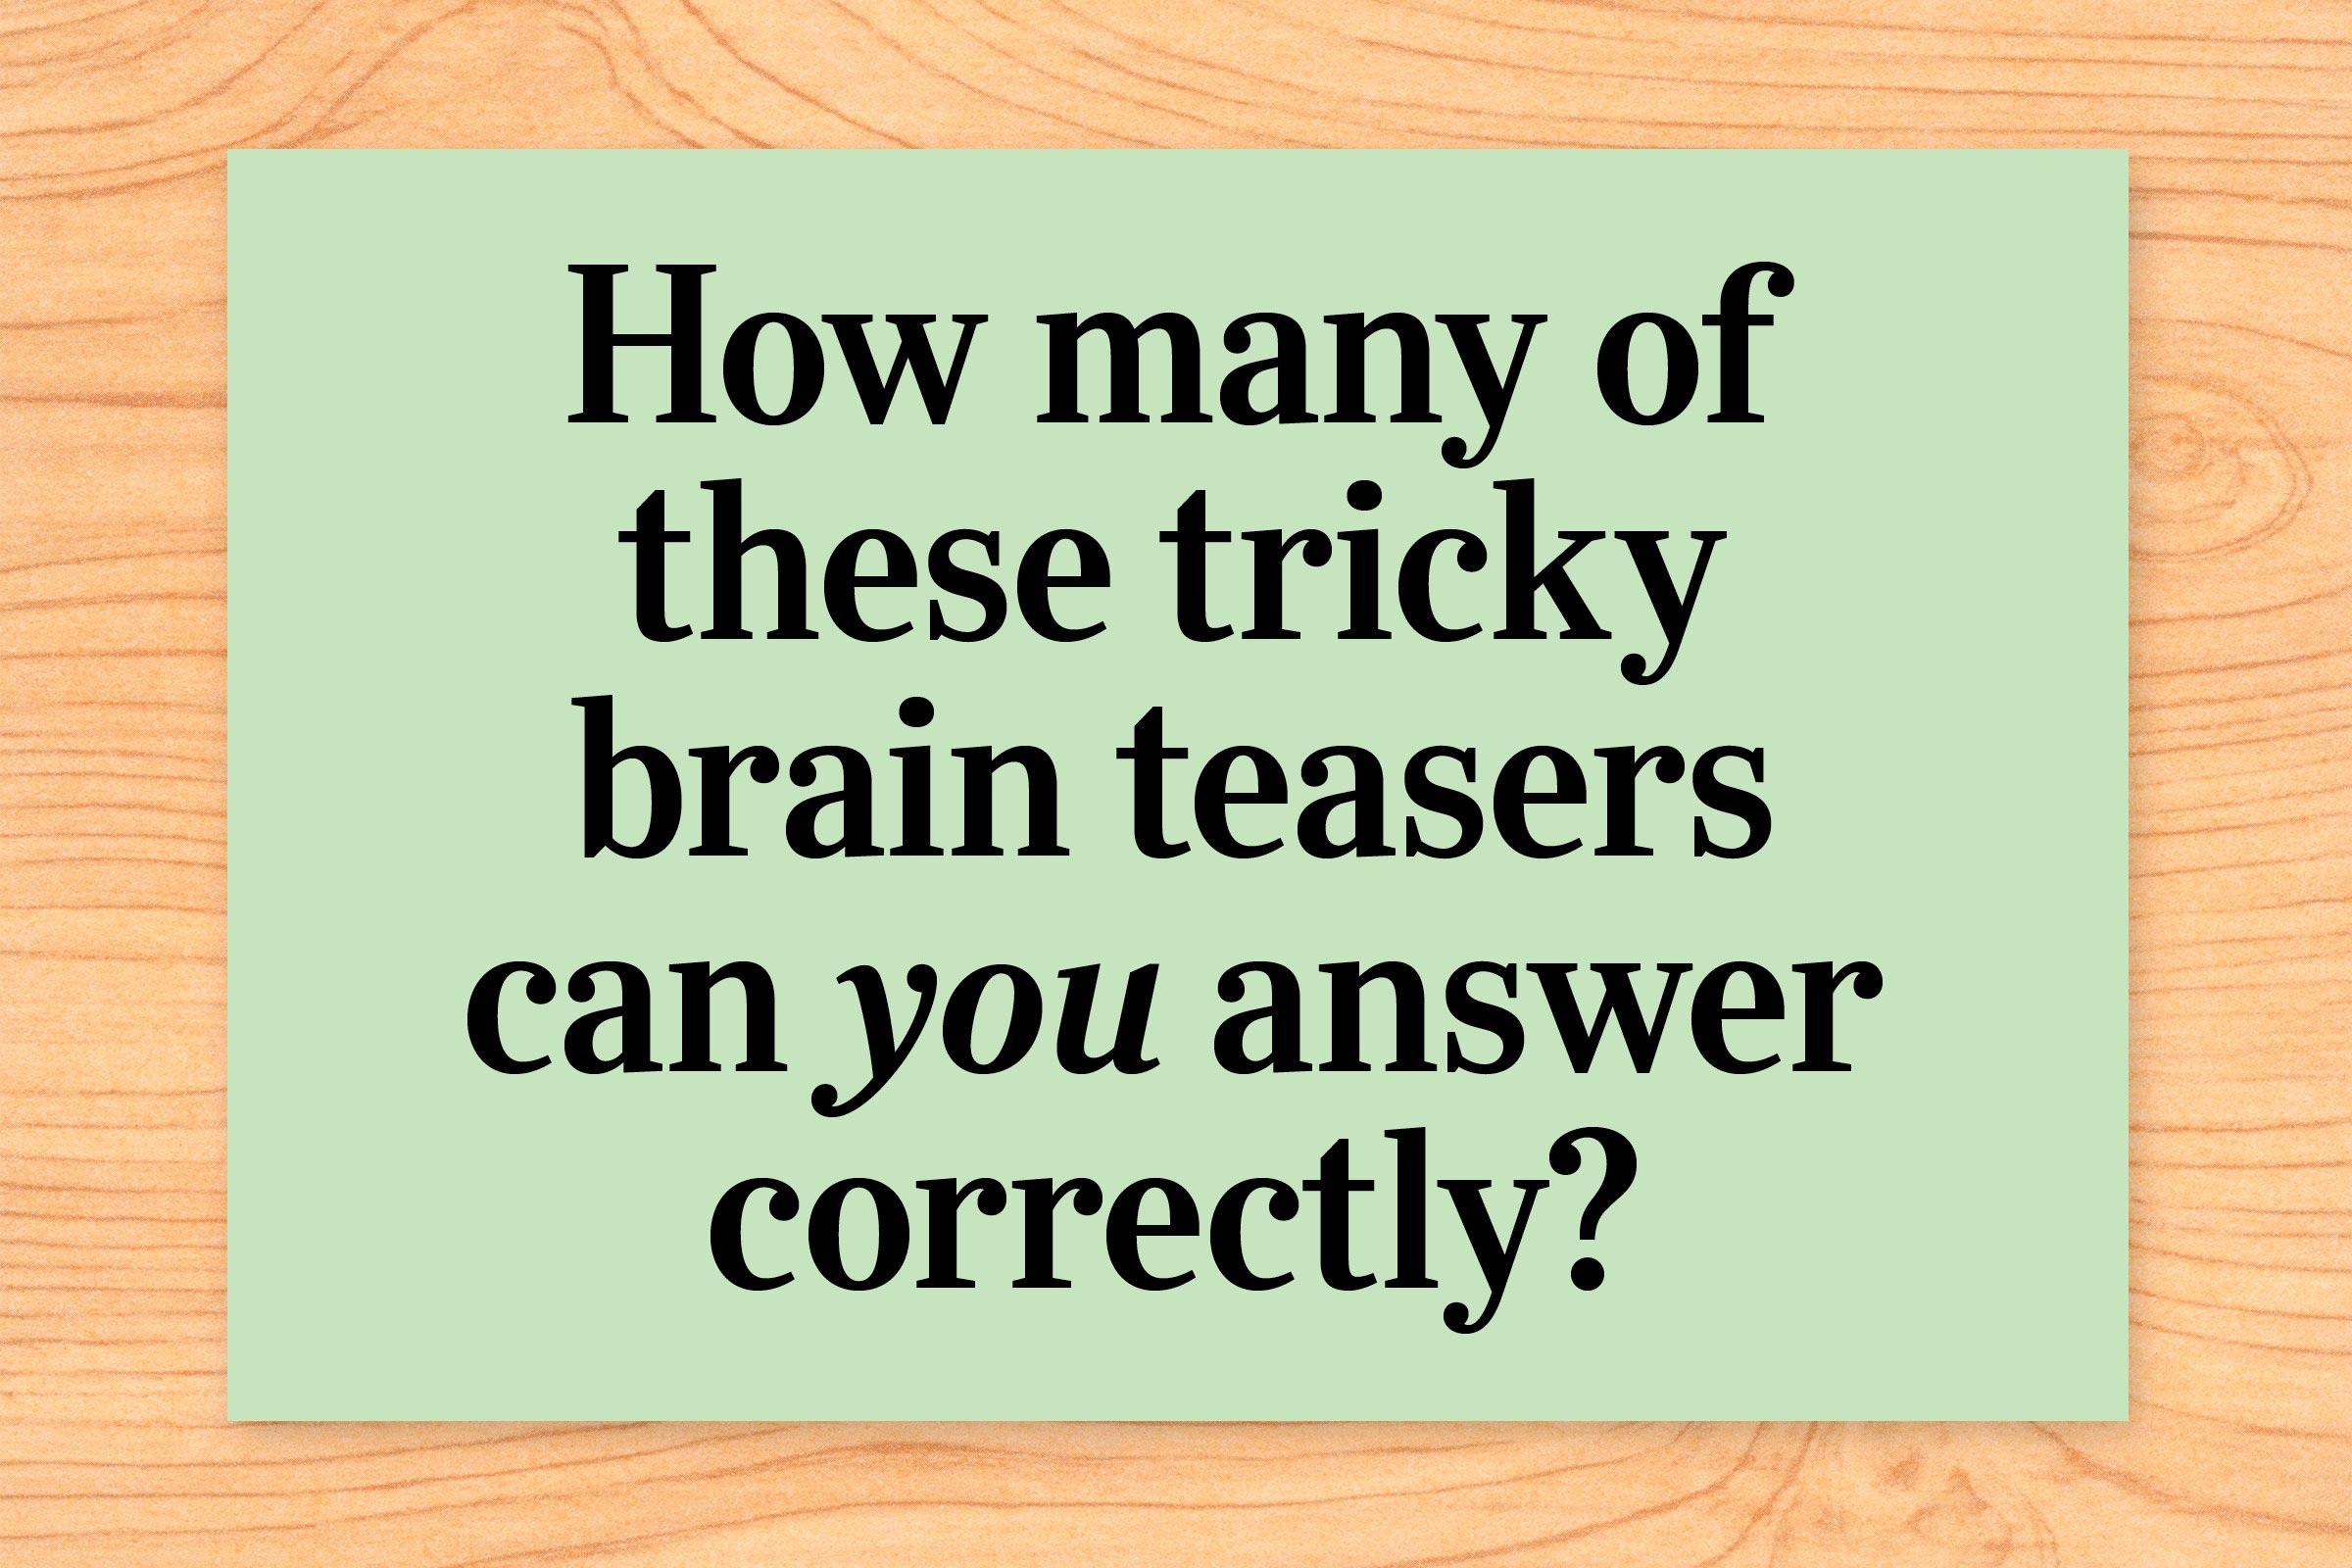 Brain Test: Tricky Puzzles Answers for All Levels - Page 16 of 46 - Level  Winner